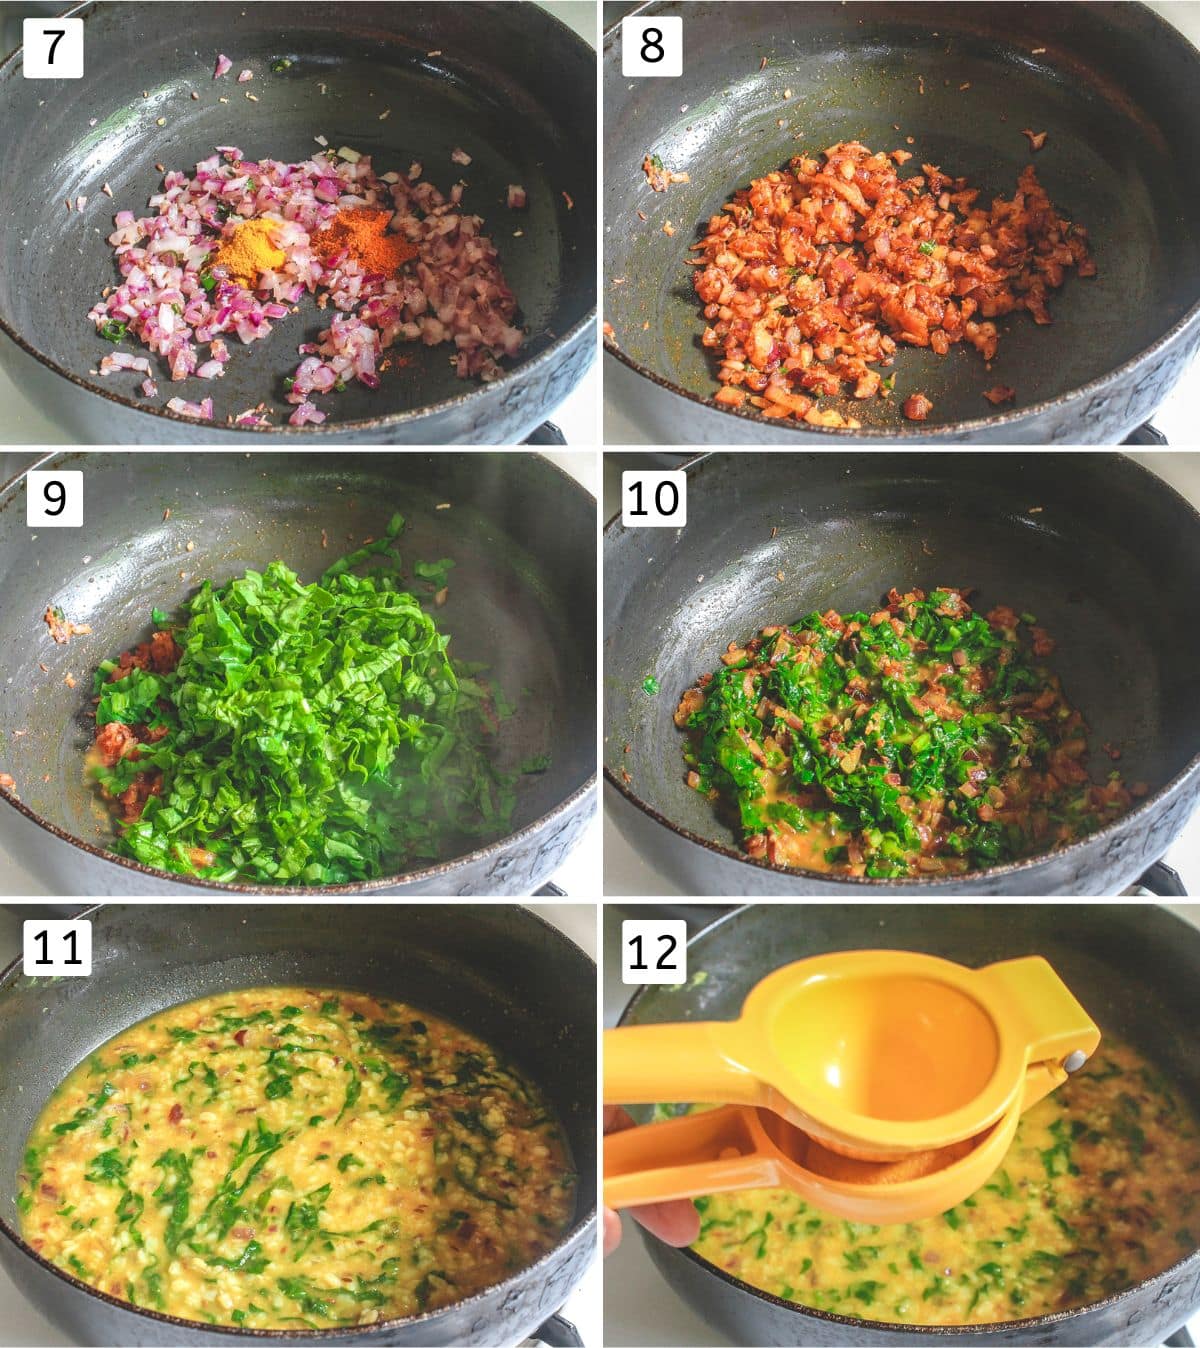 Collage of 6 images showing mixing spices, cooking spinach and mixing dal and simmering.